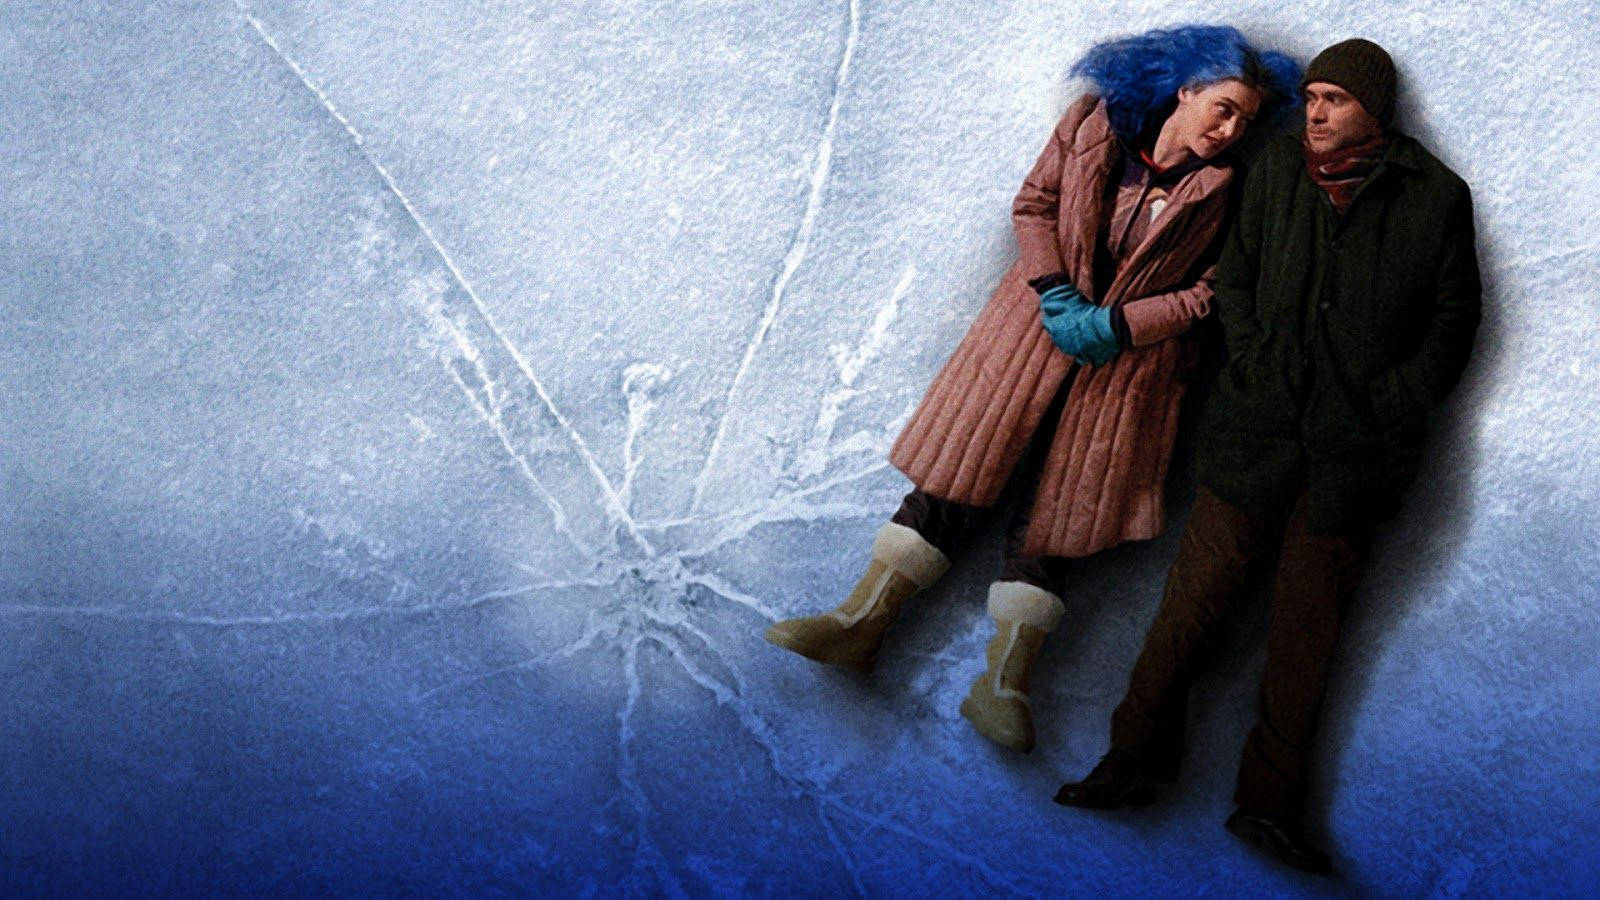 Eternal Sunshine Of The Spotless Mind Couple Movie Poster Wallpaper